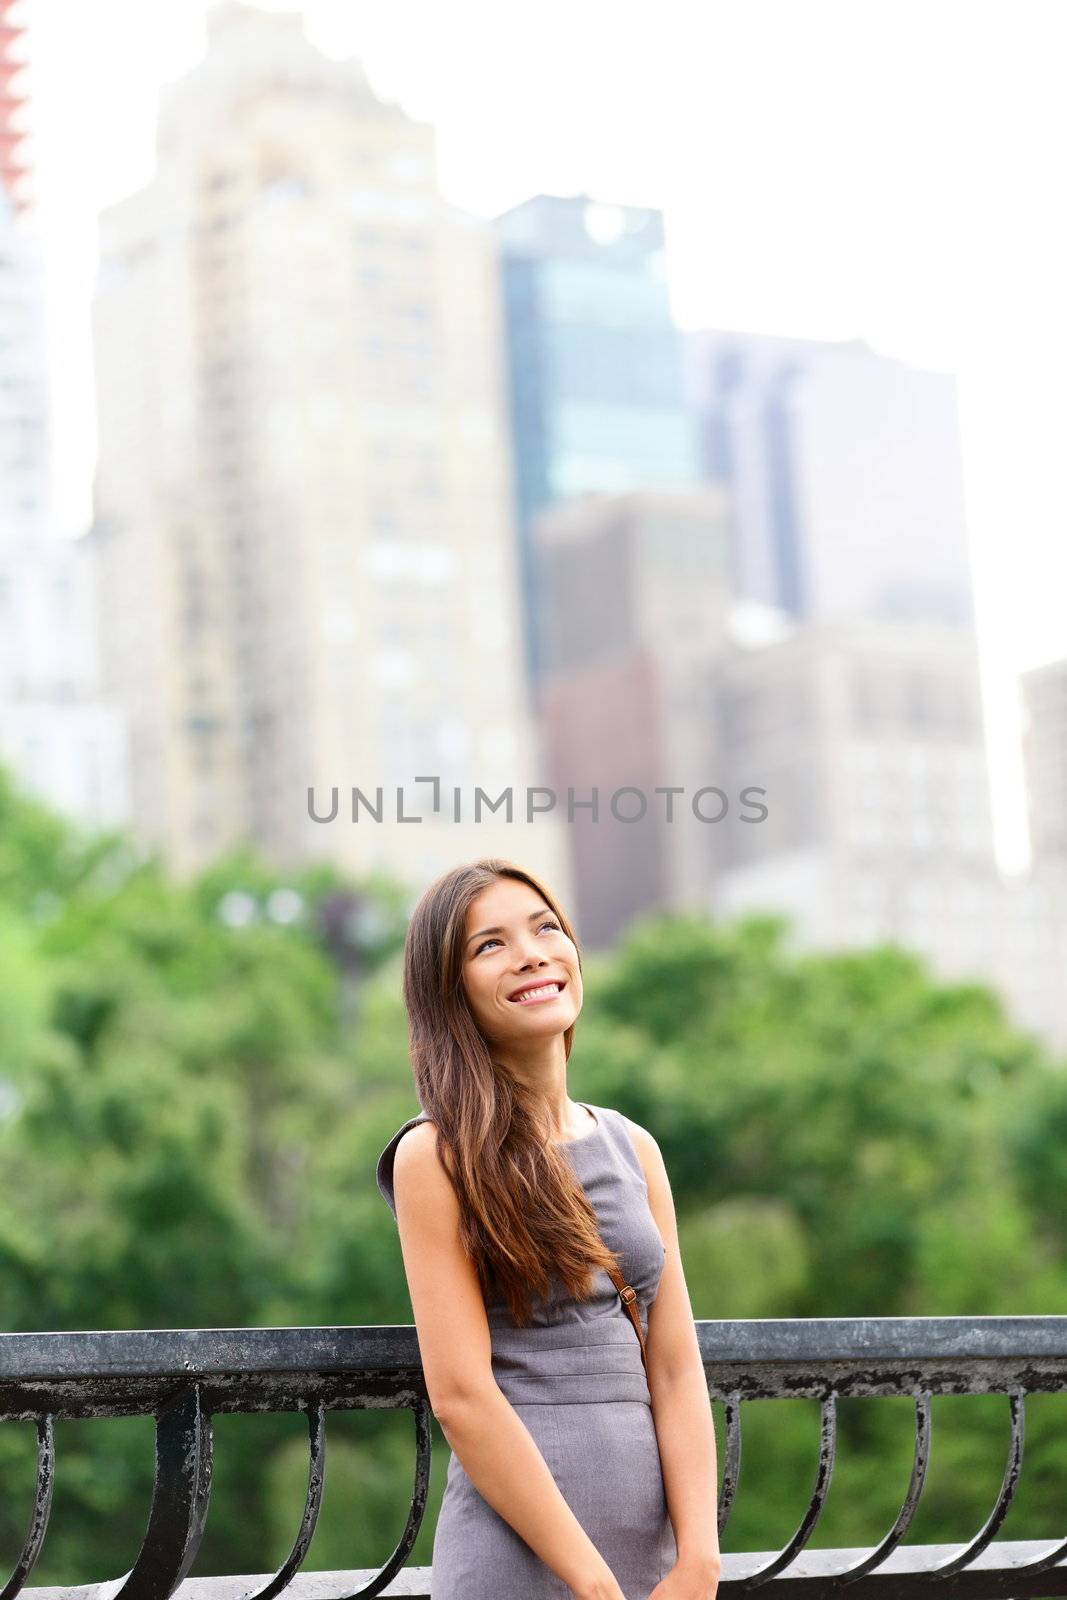 Businesswoman in New York City Central Park standing looking up at copy space with skyscraper buildings from Manhattan skyline in background. Young female professional. Mixed Asian / Caucasian race.